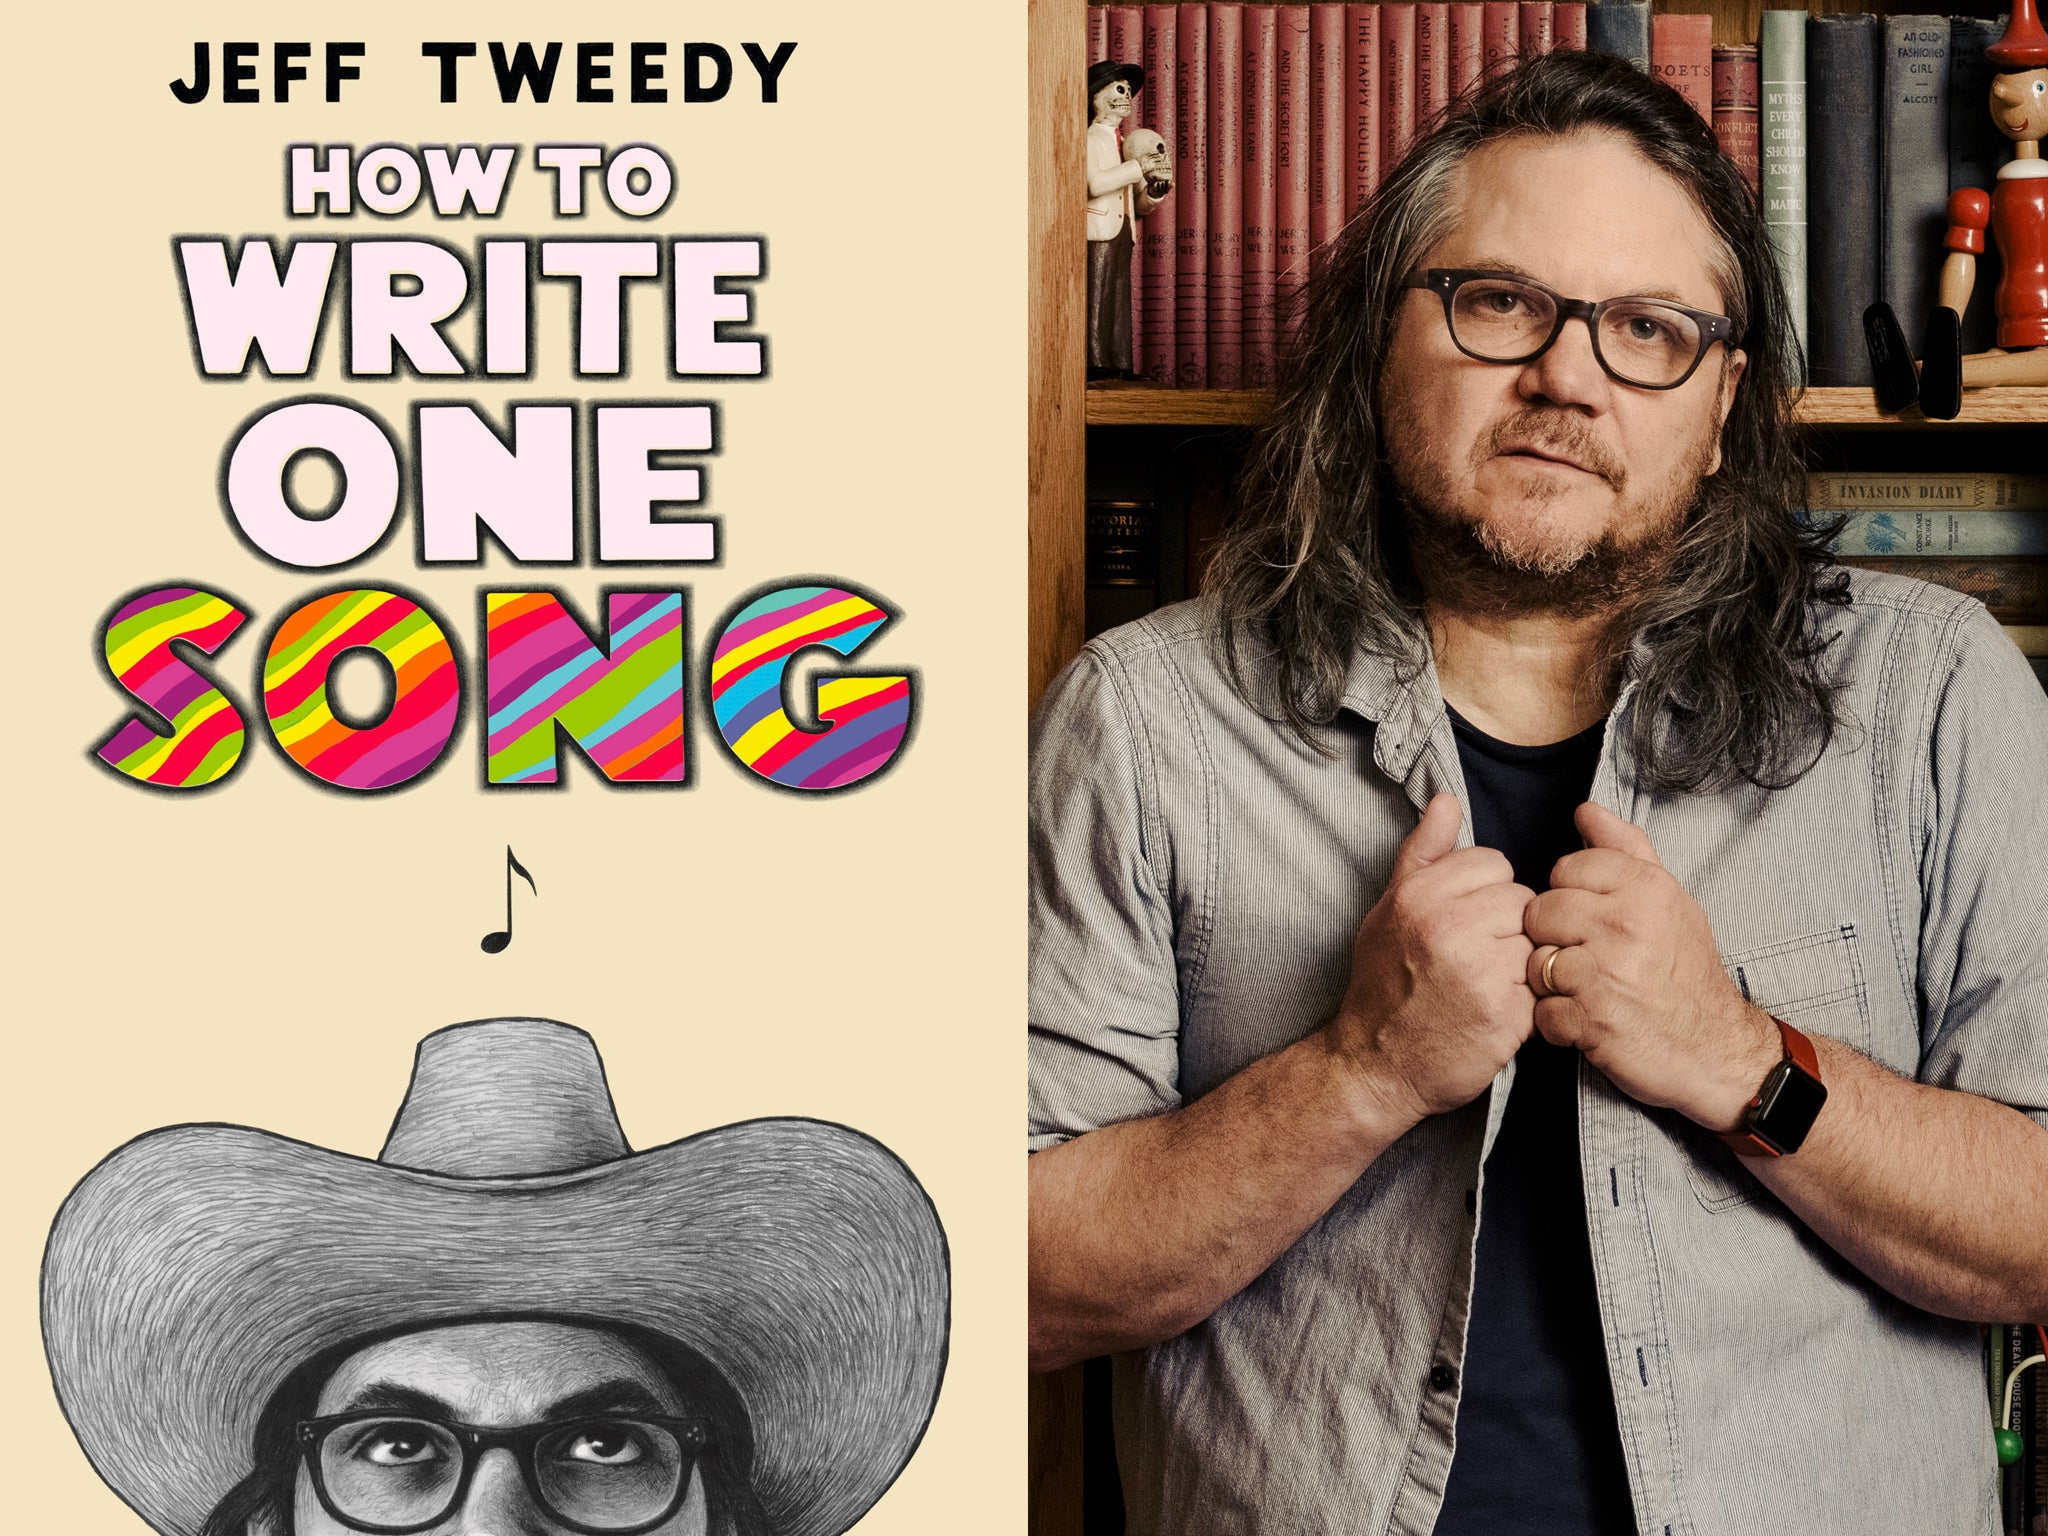 Jeff Tweedy brings a simple and engaging style to his discursive songwriting manual ‘How to Write One Song’